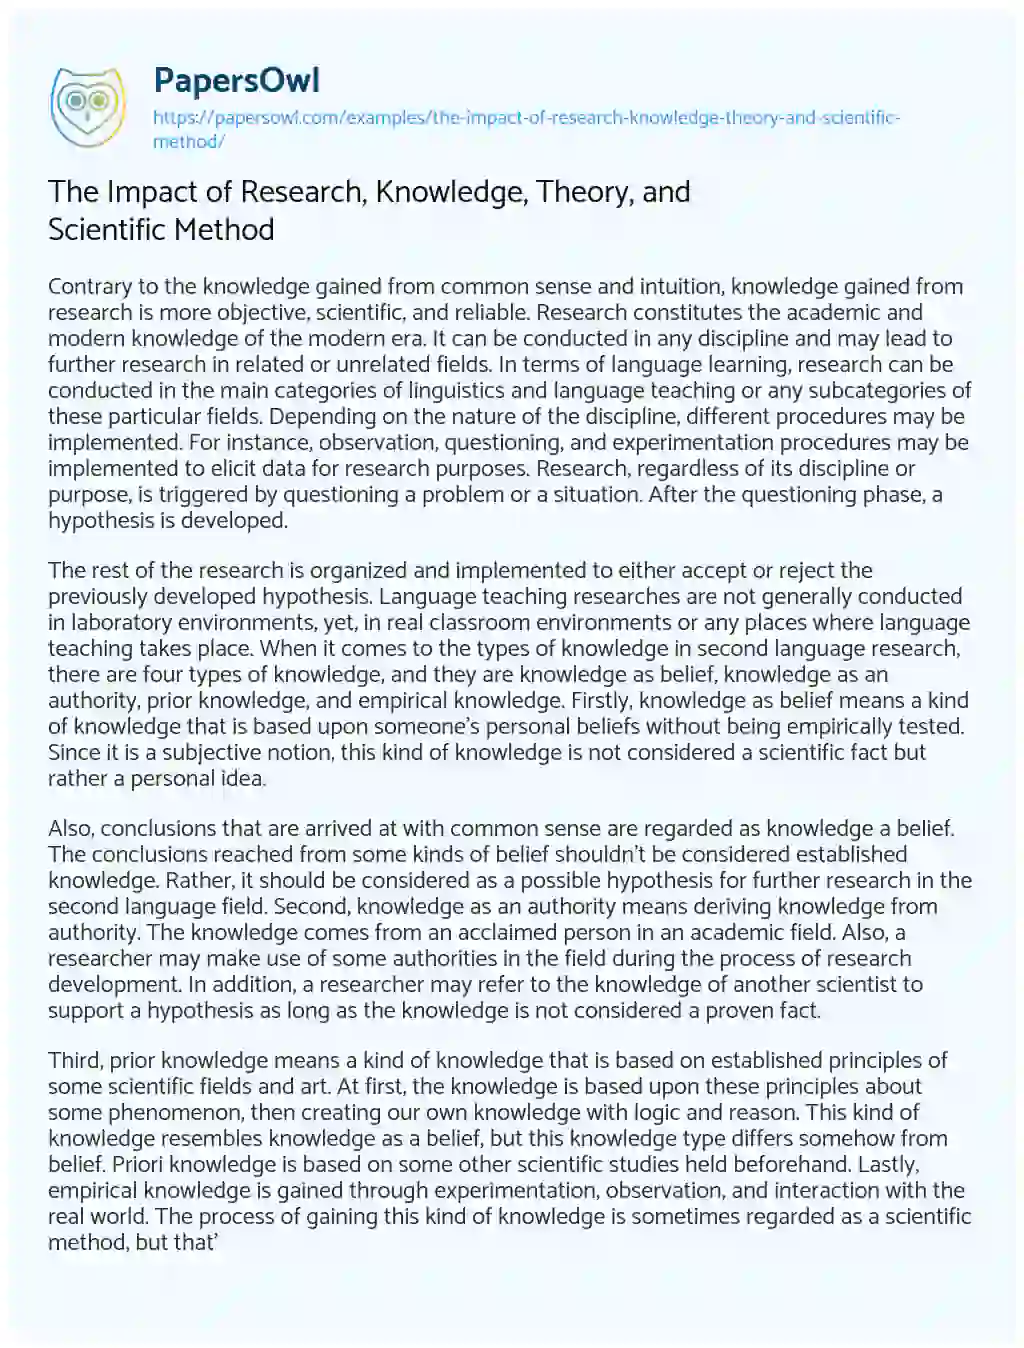 Essay on The Impact of Research, Knowledge, Theory, and Scientific Method